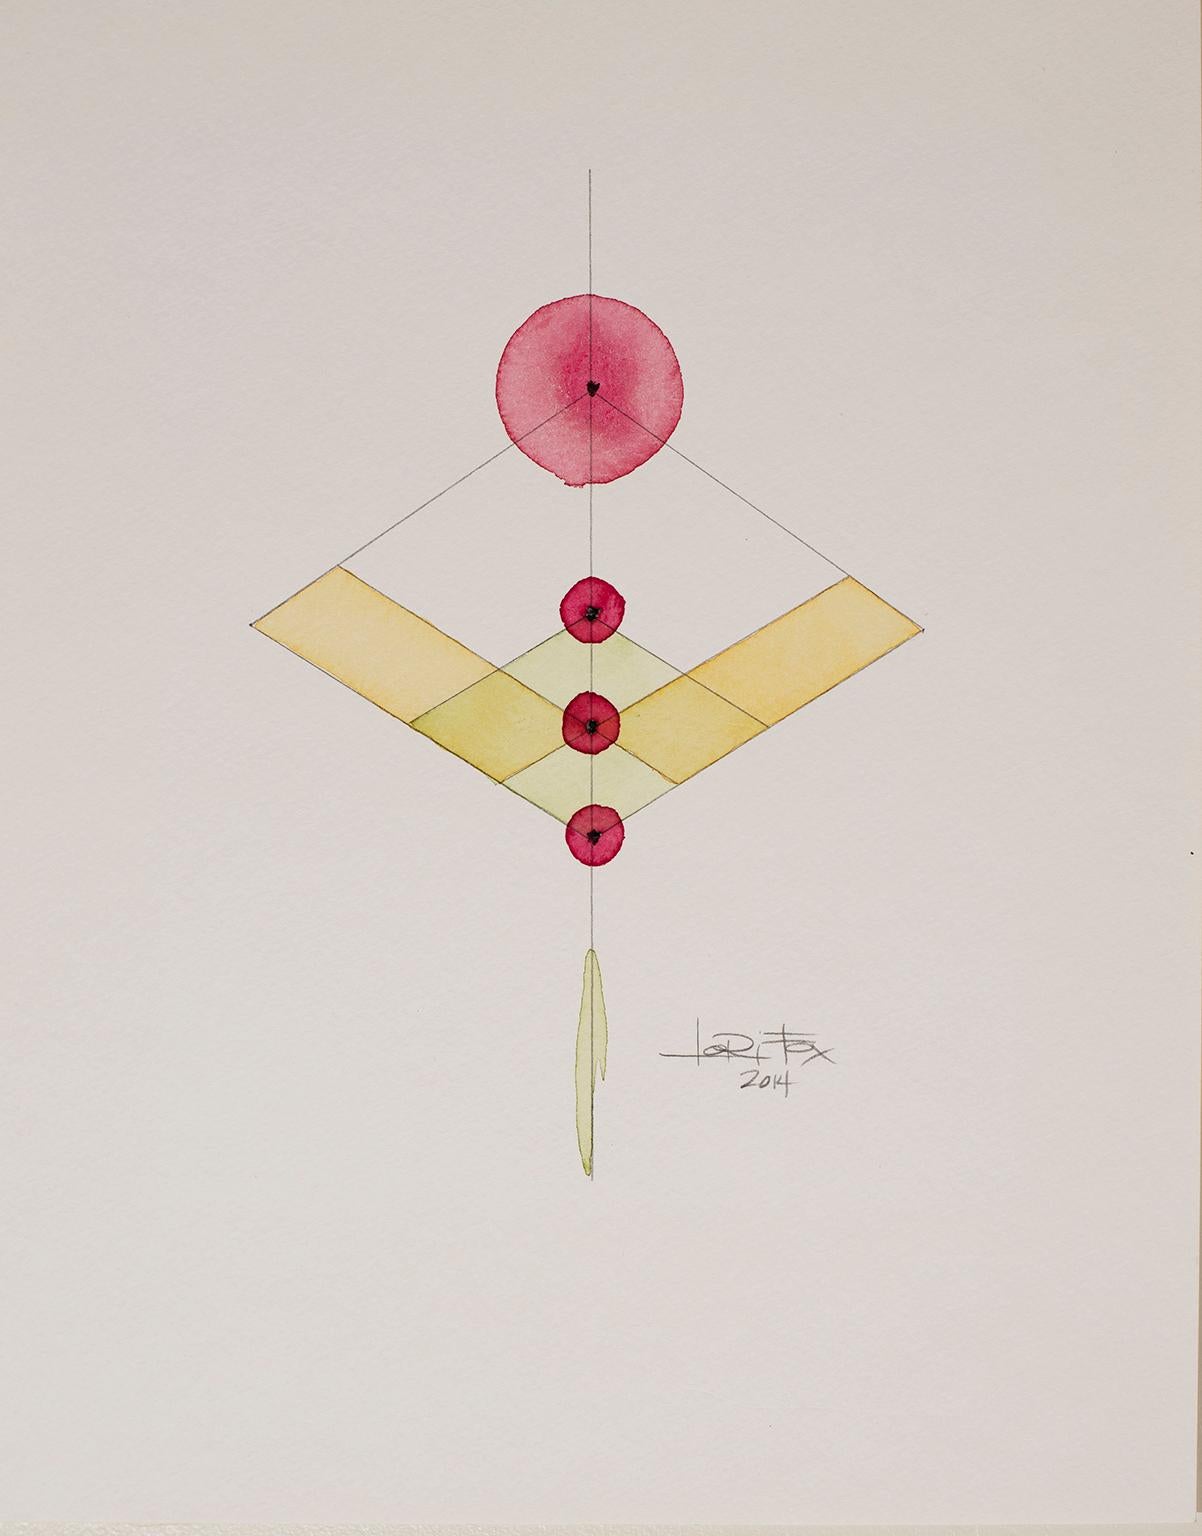 Totem 2.008, 2014 by Lori Fox
Watercolor and graphite on paper. 
14 x 11 inch unframed.  
Framed size is 15.25 x 12.25 x 1.75 inch (ask about framed price)
Yellow, red and black colors make this original from the Totem series by Lori Fox. 

Totem: